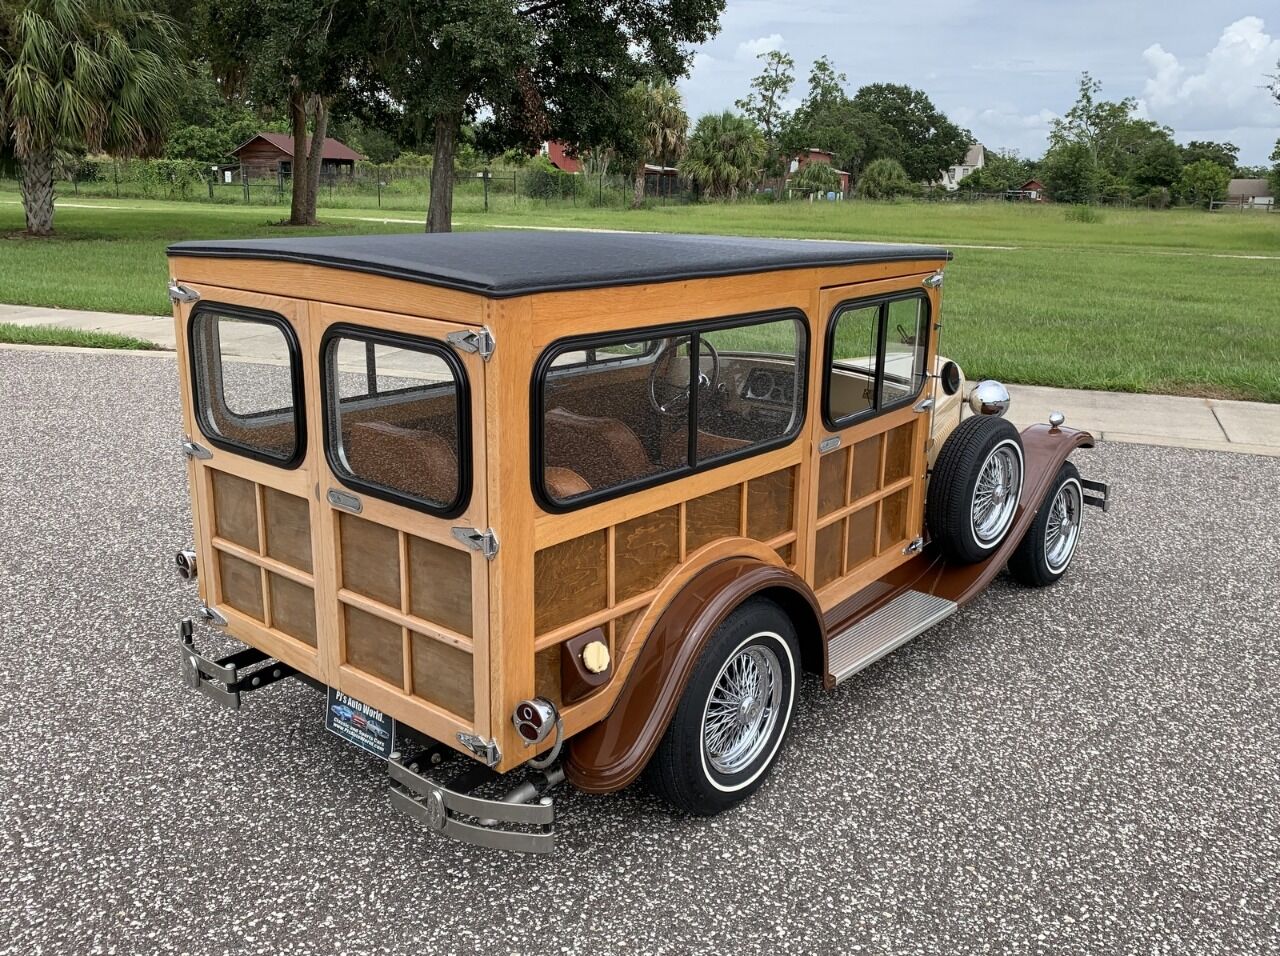 1928 Ford Model A 8